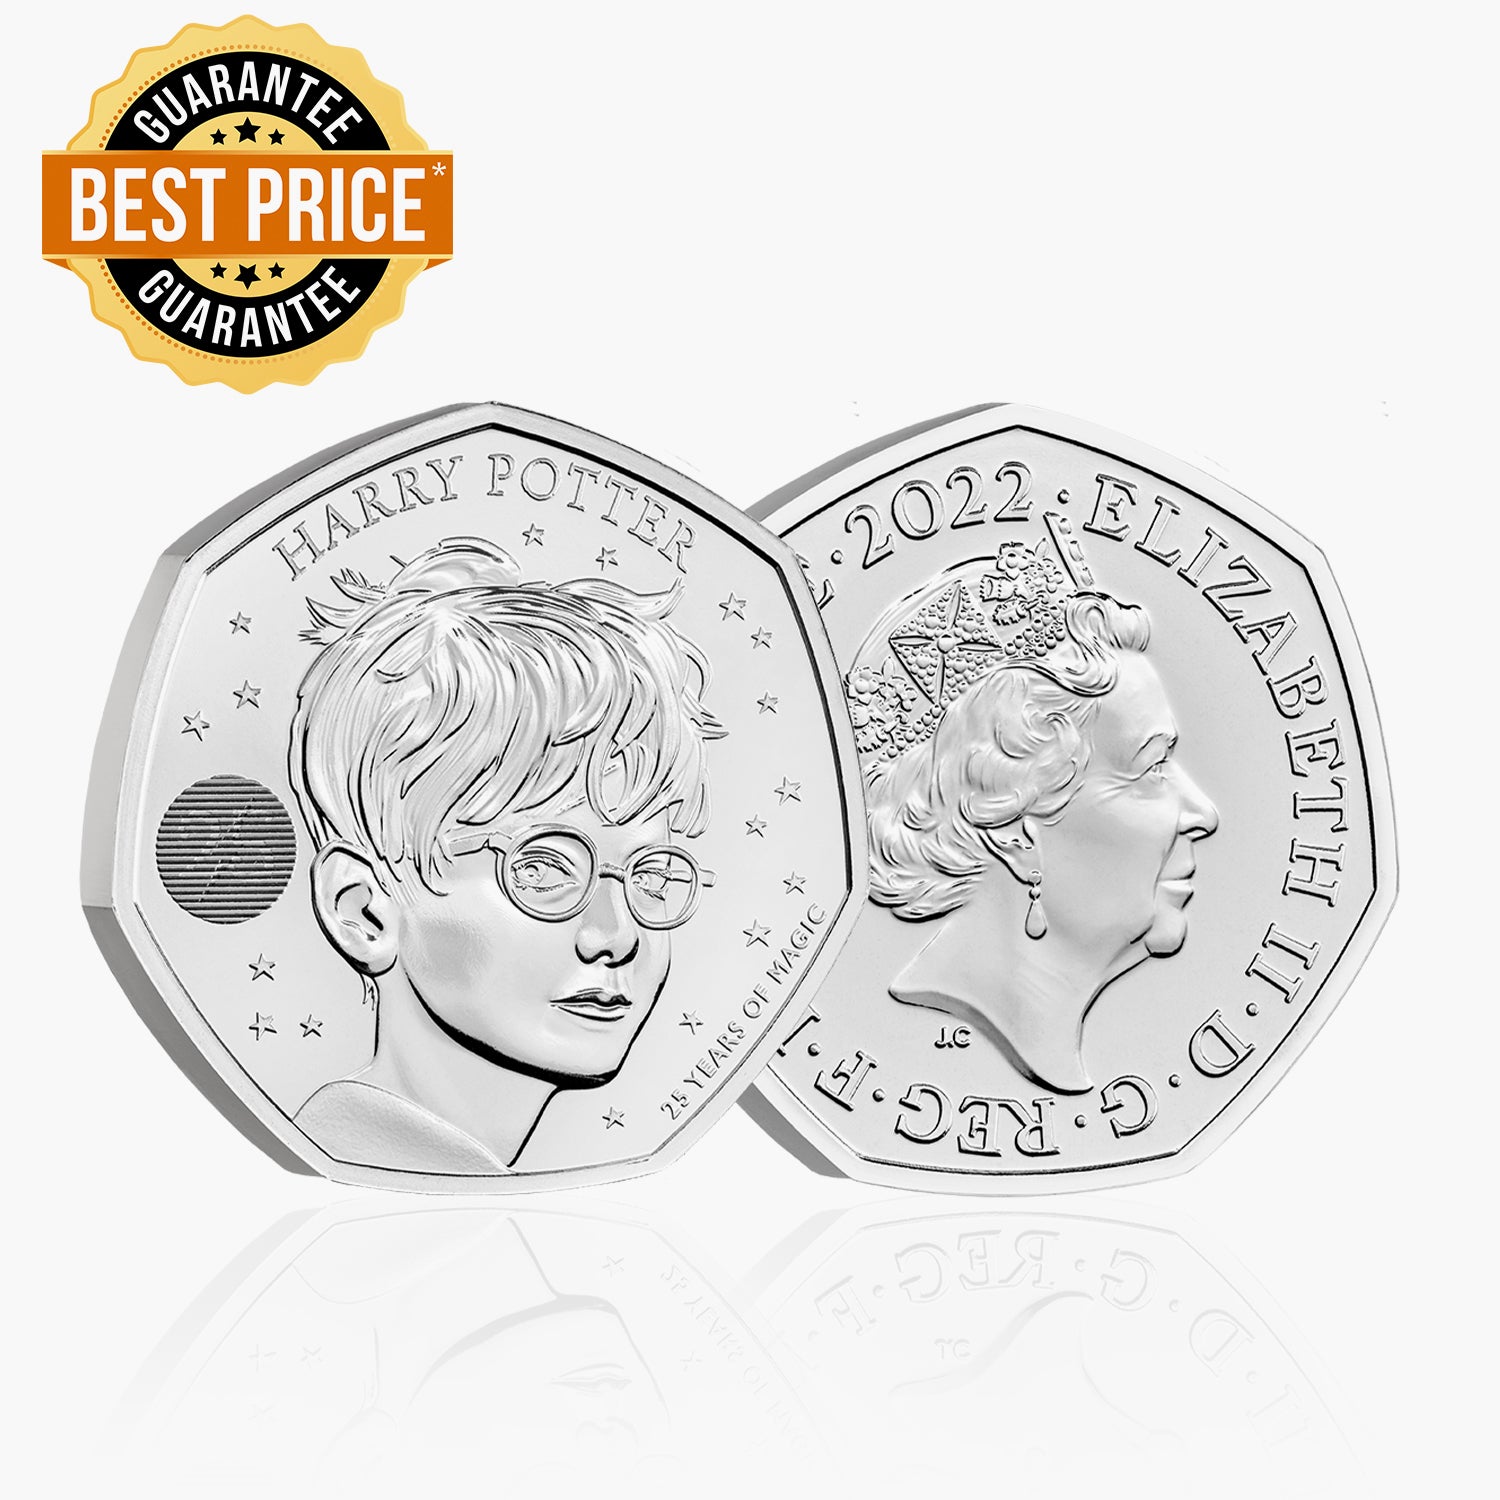 Harry Potter 2022 50p Brilliant Uncirculated Coin